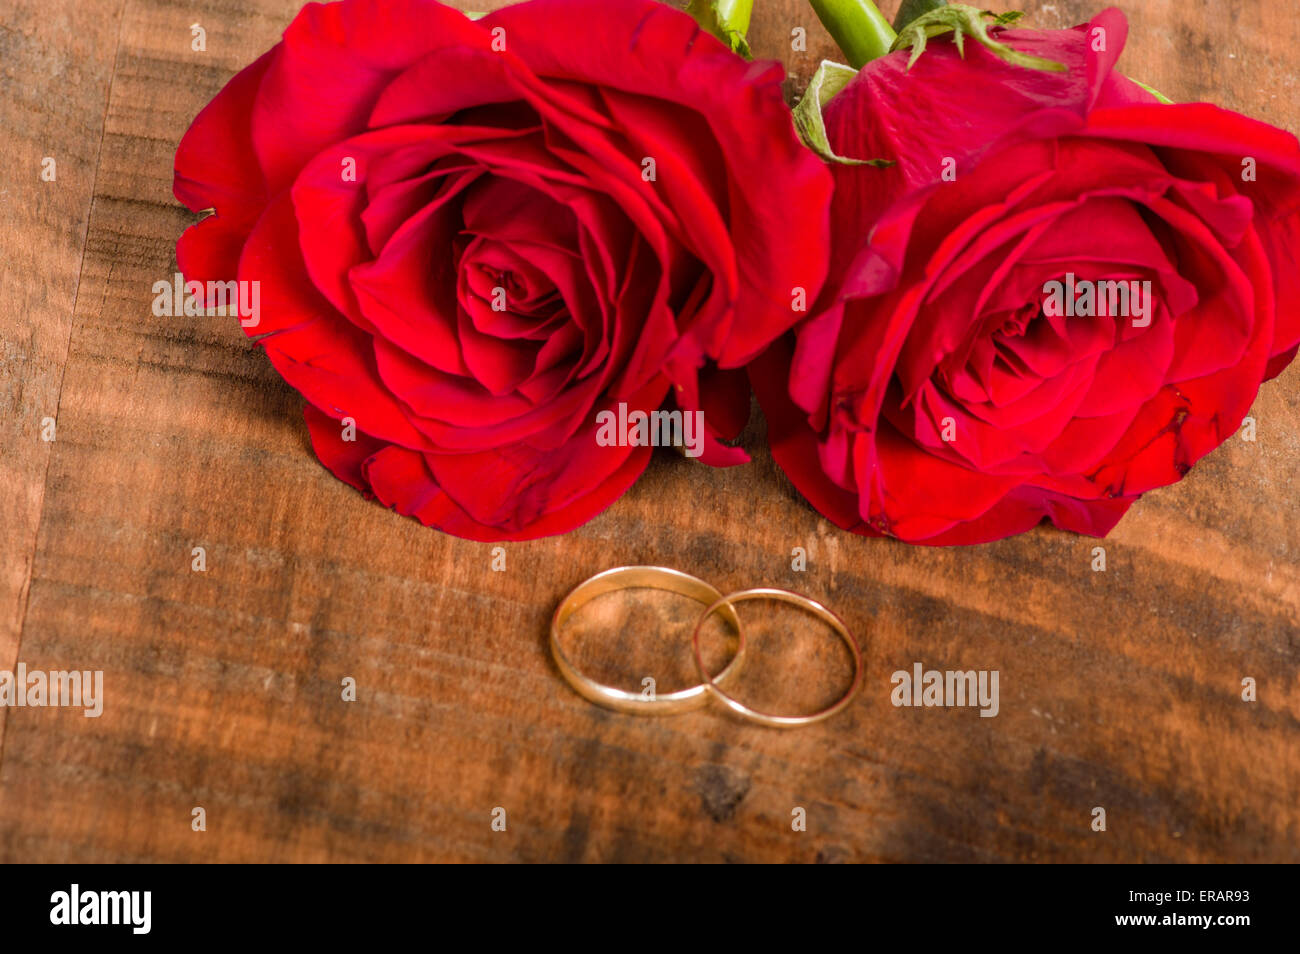 Gold bands on wood table with red roses Stock Photo